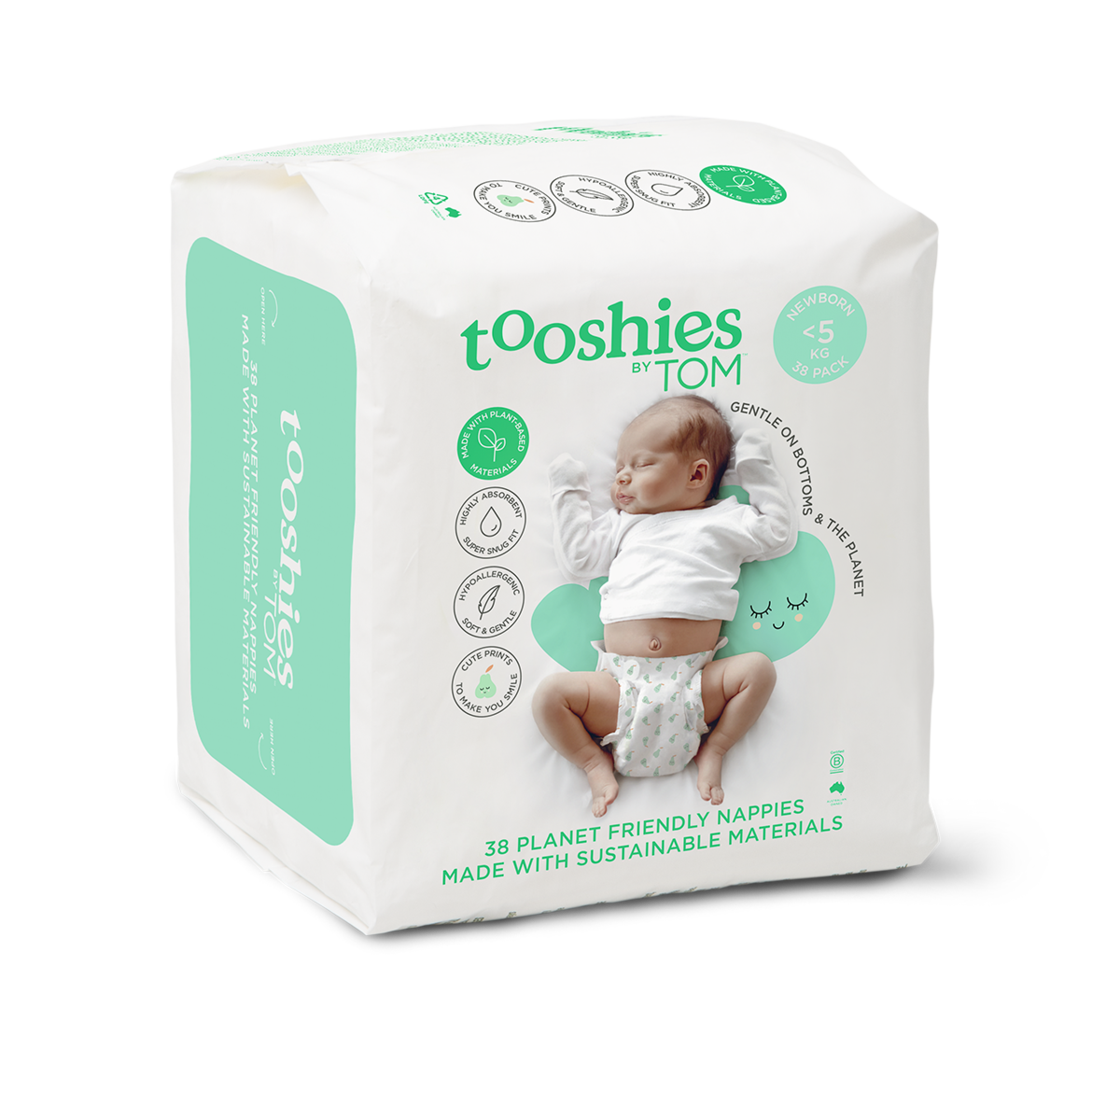 Eco Nappies – Newborn. <5 kg, 38 pcs by Tooshies by TOM